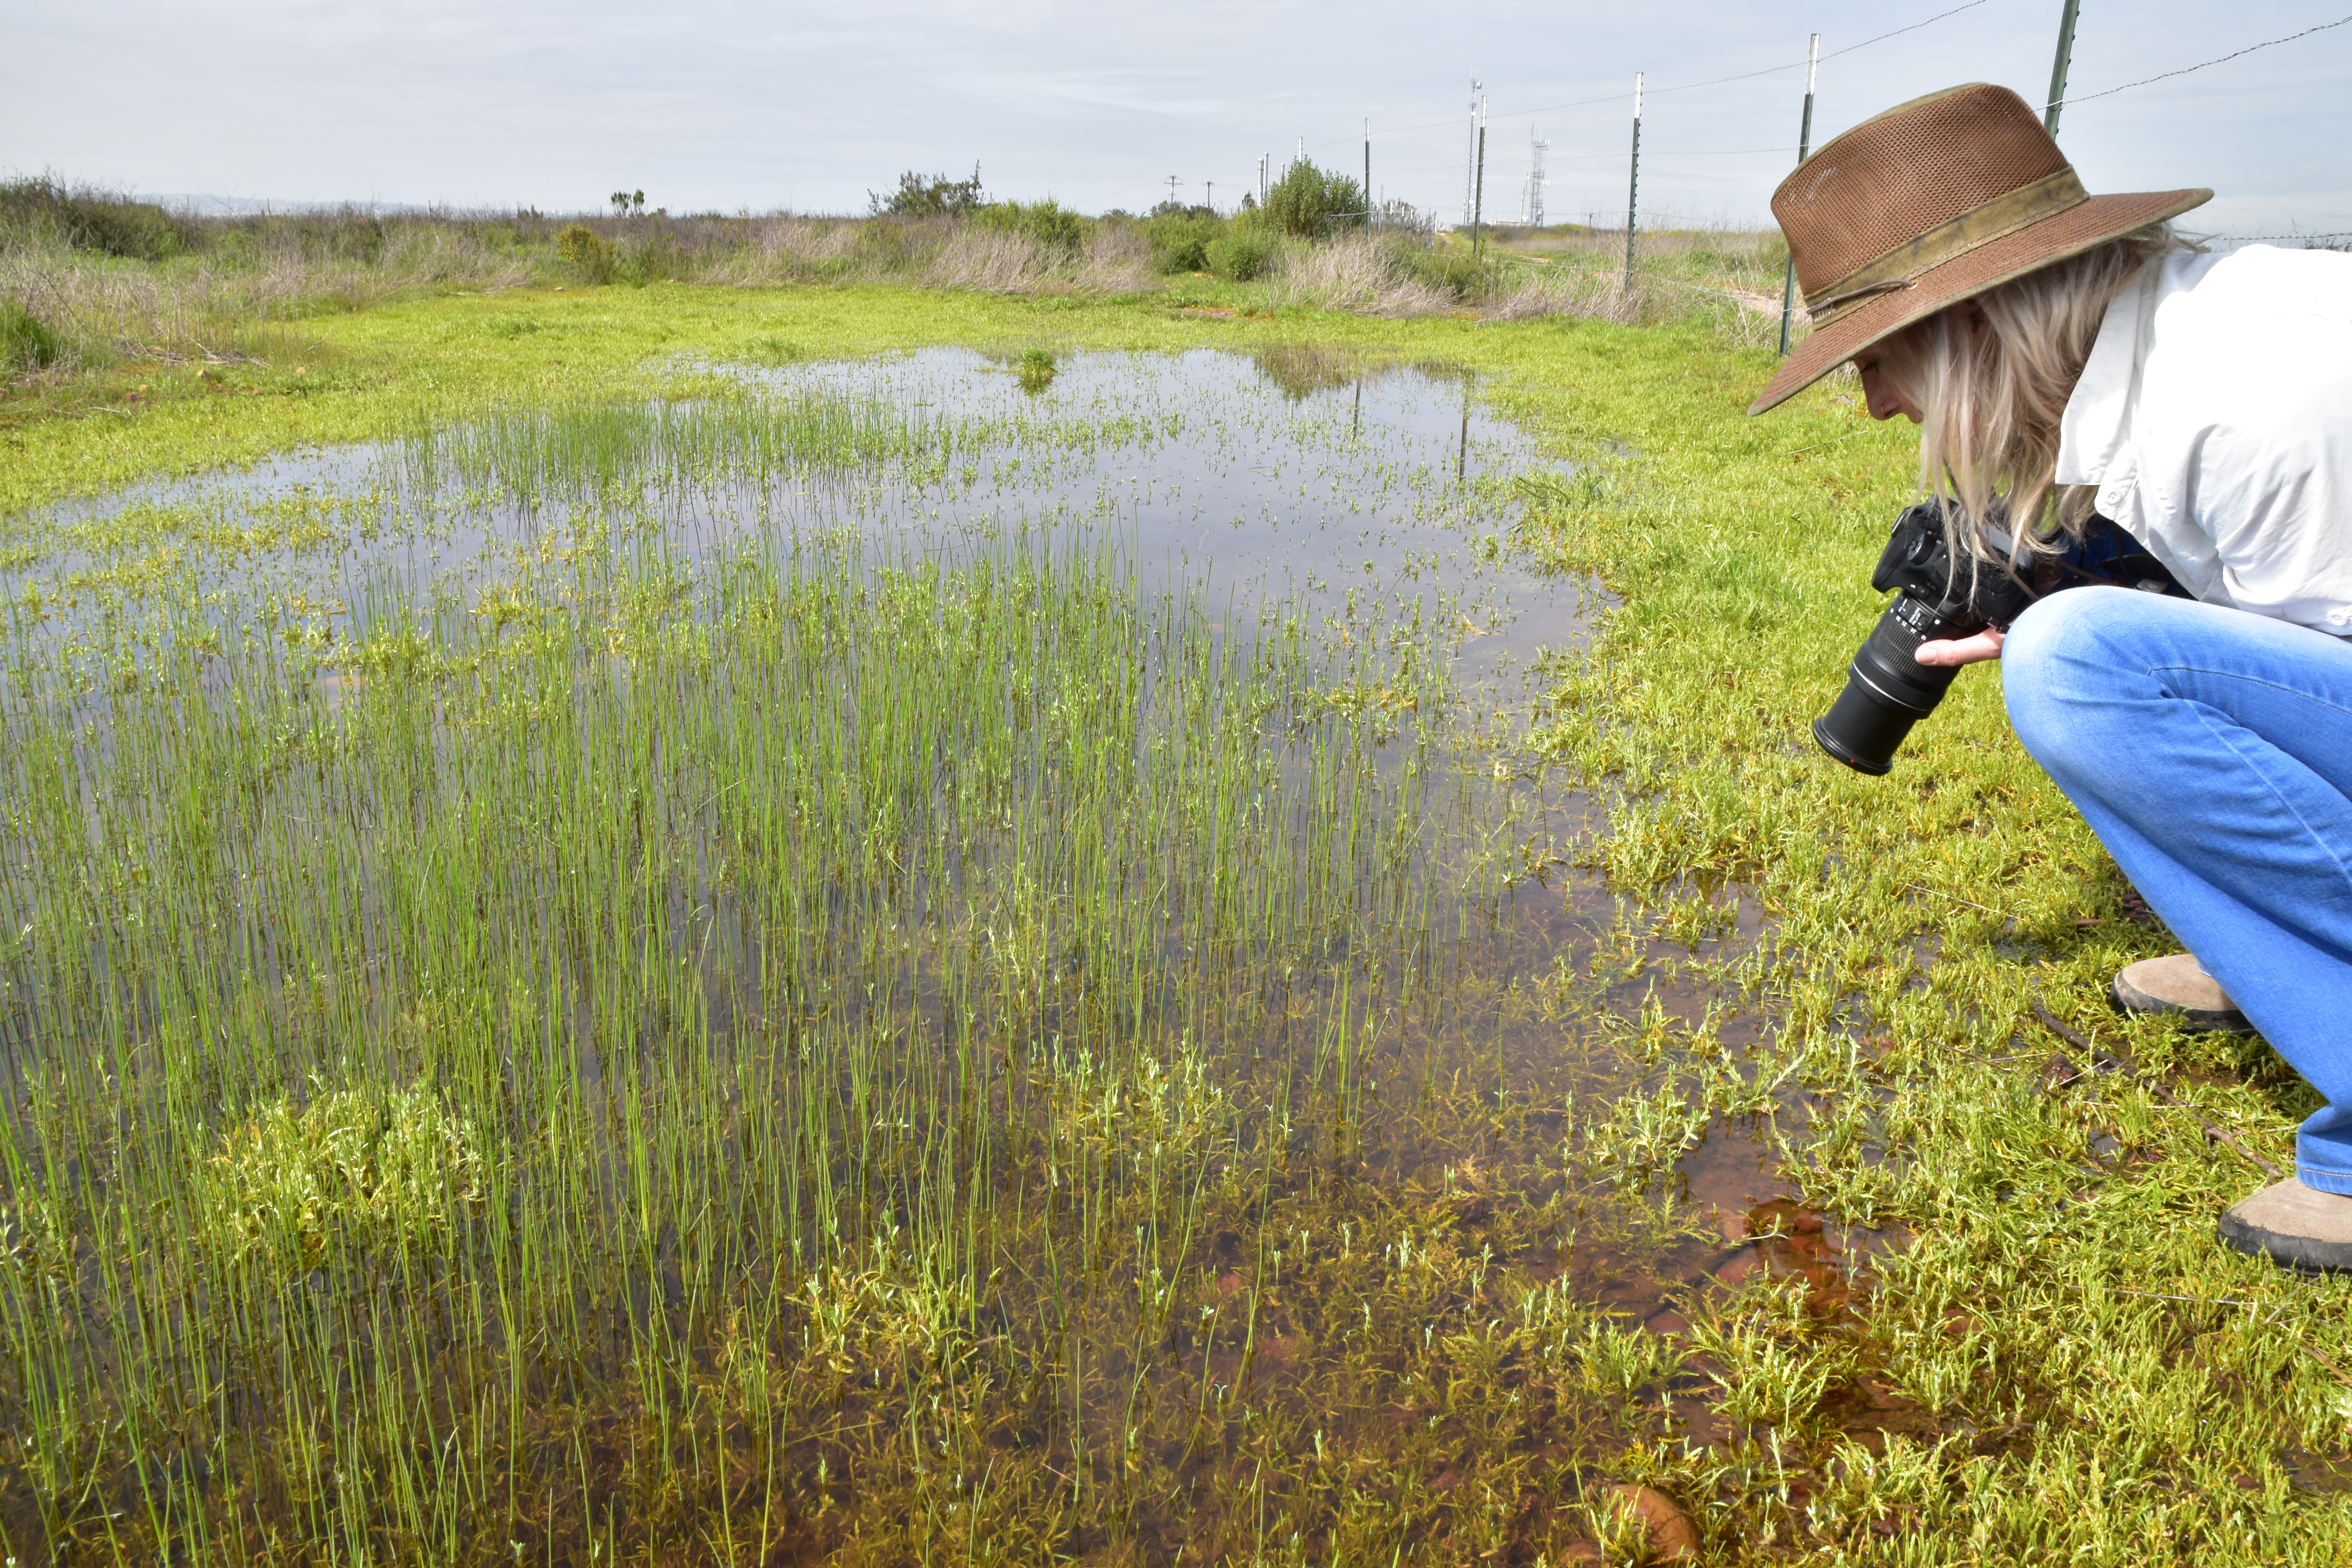 A woman takes photos of endangered species in a shallow vernal pool surrounded by vegetation.